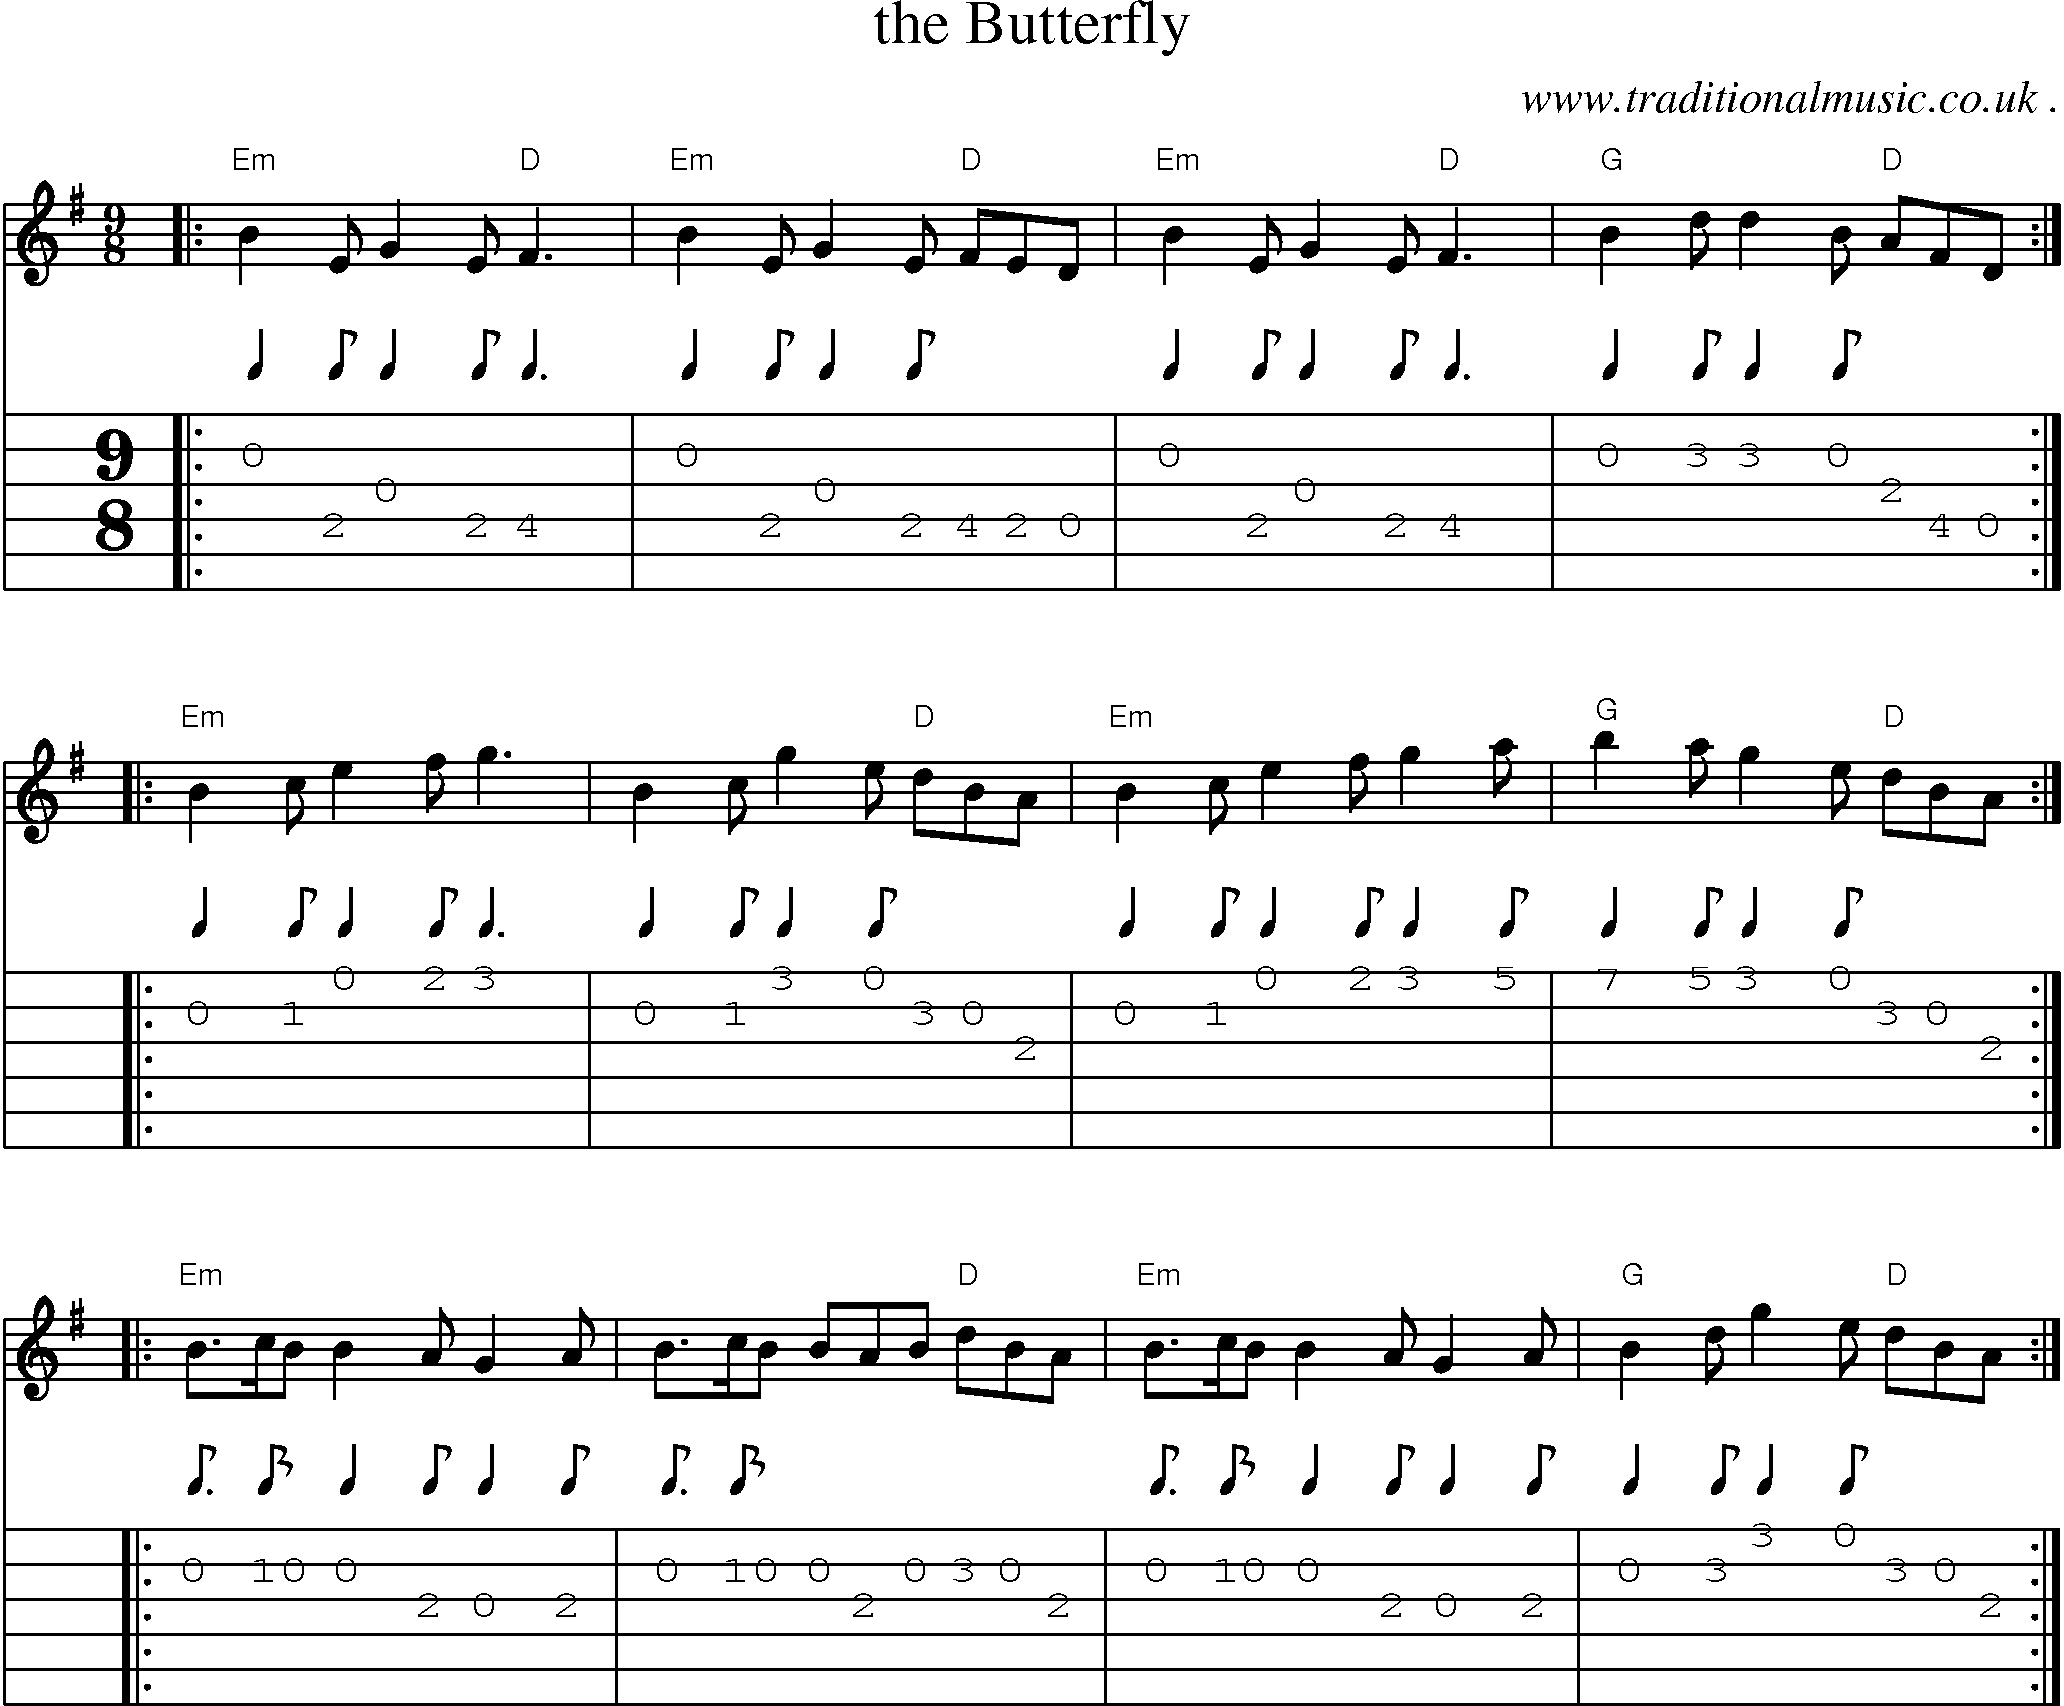 Sheet-music  score, Chords and Guitar Tabs for The Butterfly